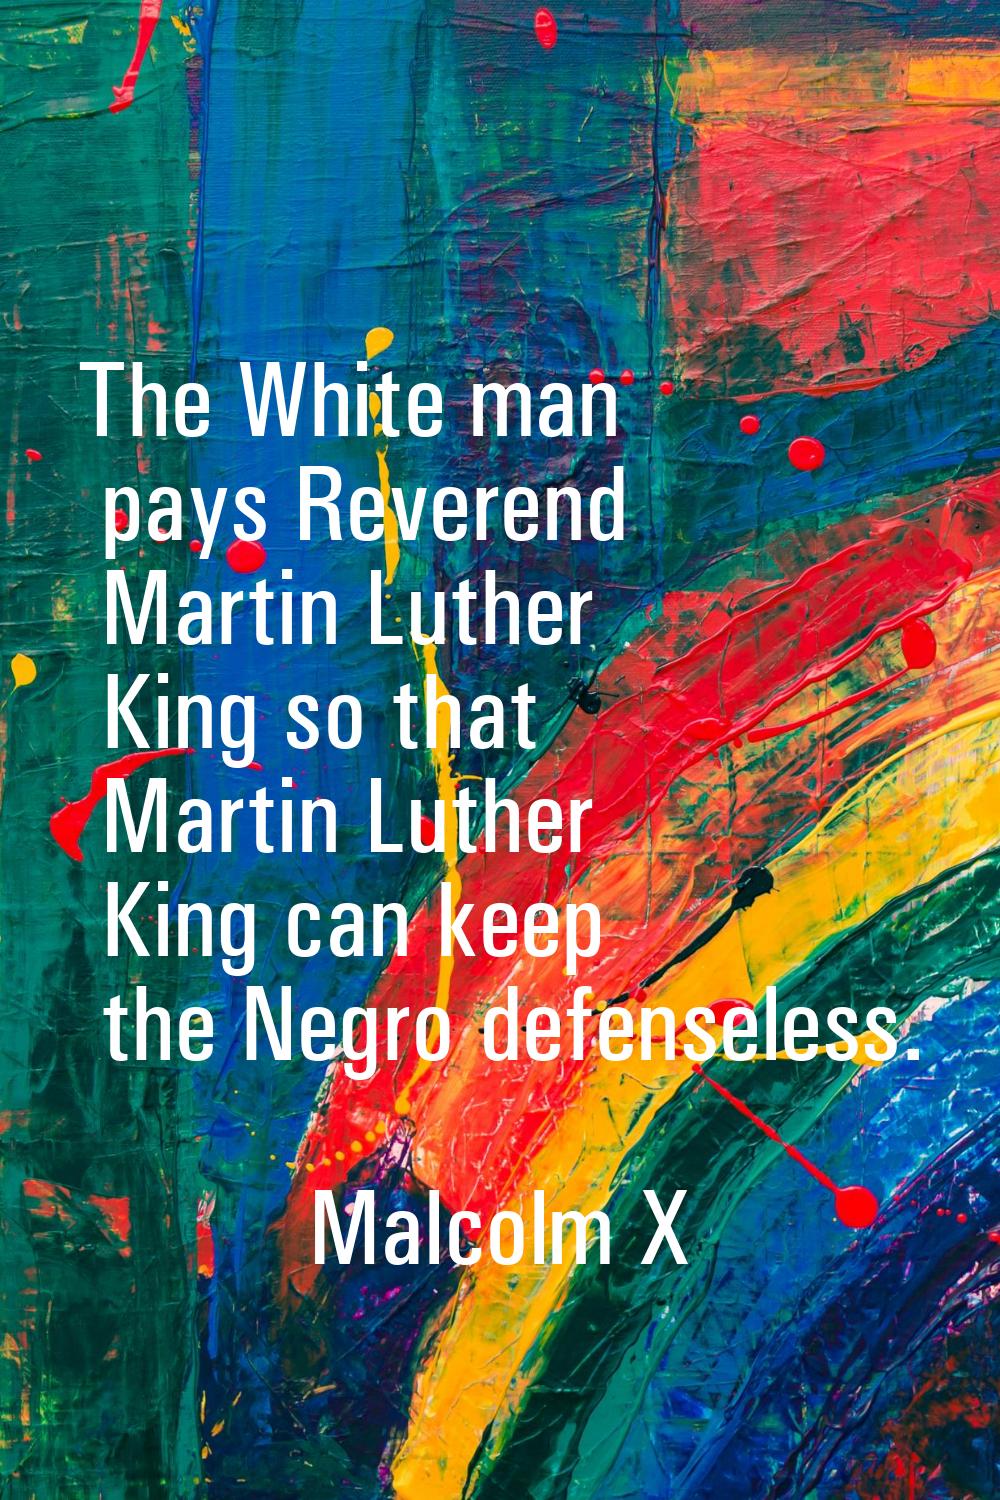 The White man pays Reverend Martin Luther King so that Martin Luther King can keep the Negro defens